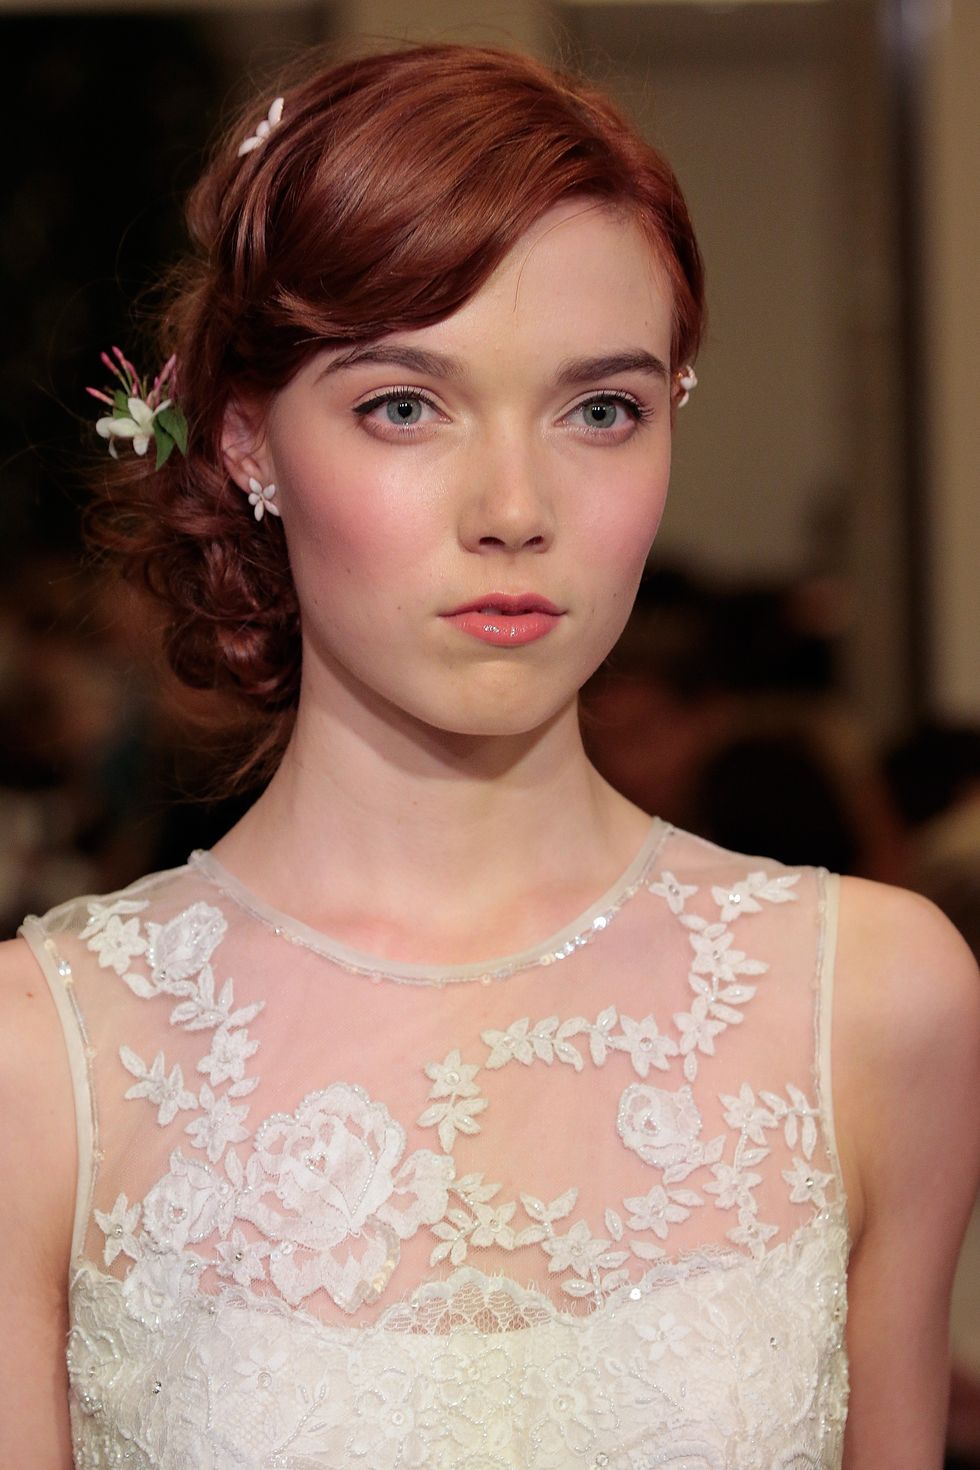 Beautiful hairstyles from Bridal Fashion Week